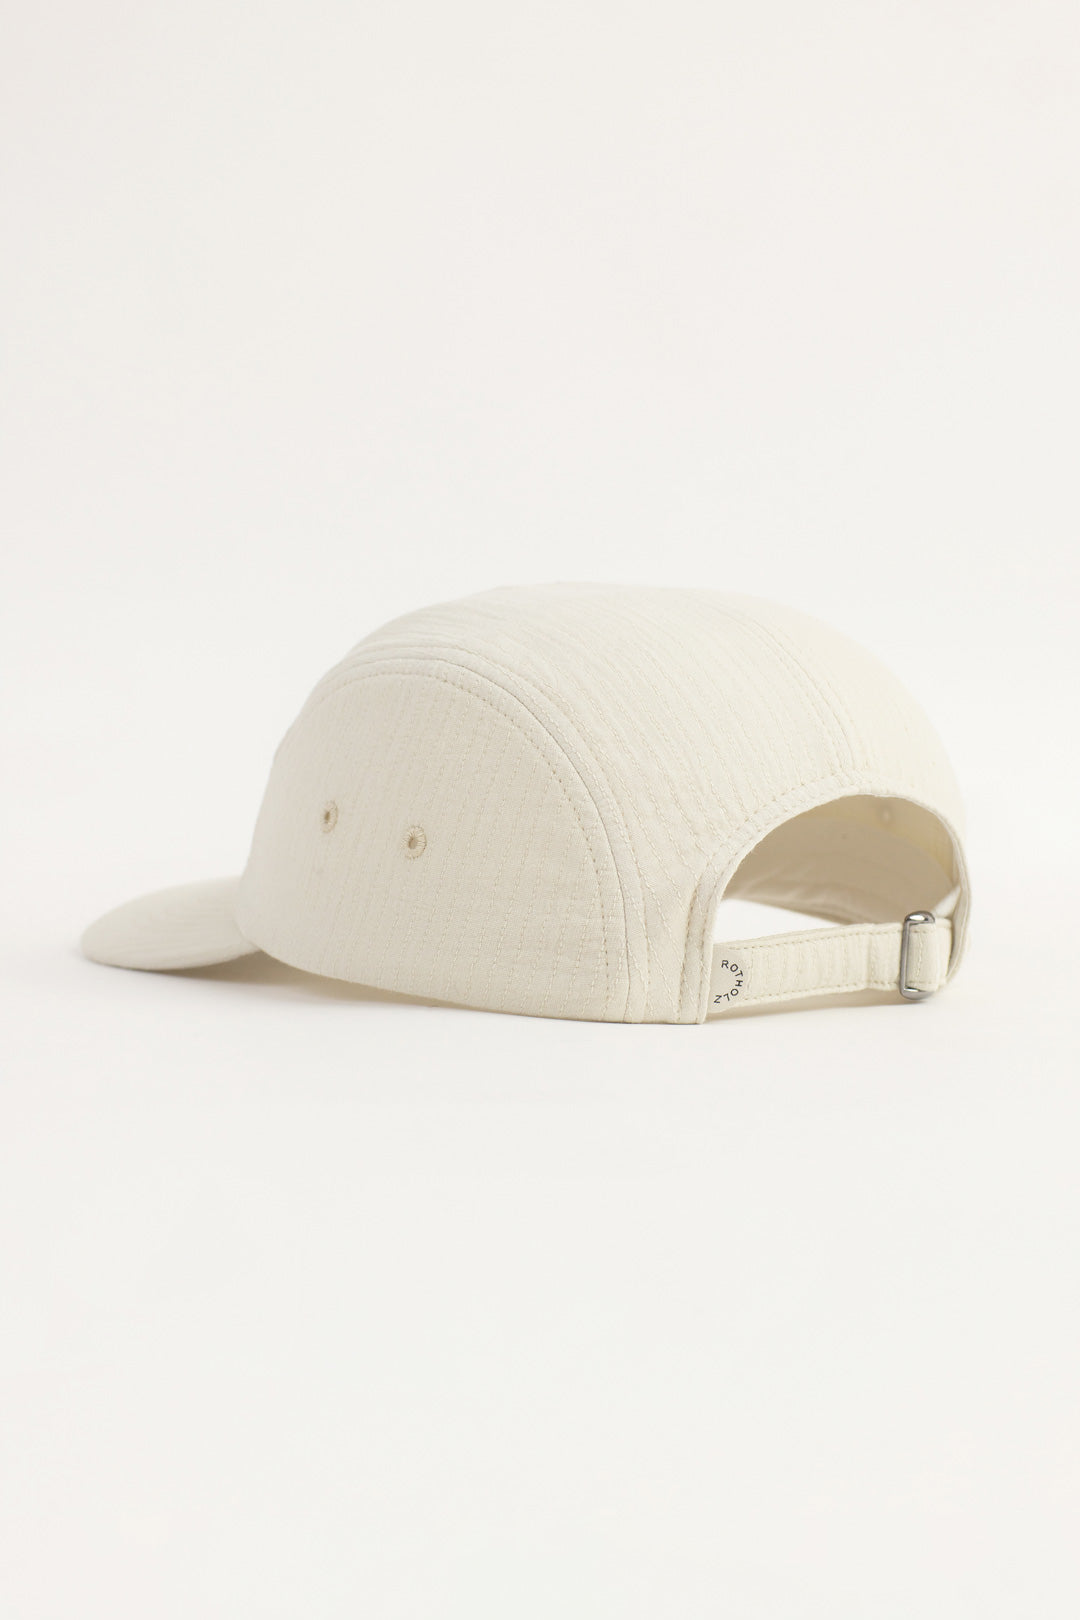 Sand-colored cap 5 panel made of 100% organic cotton by Rotholz